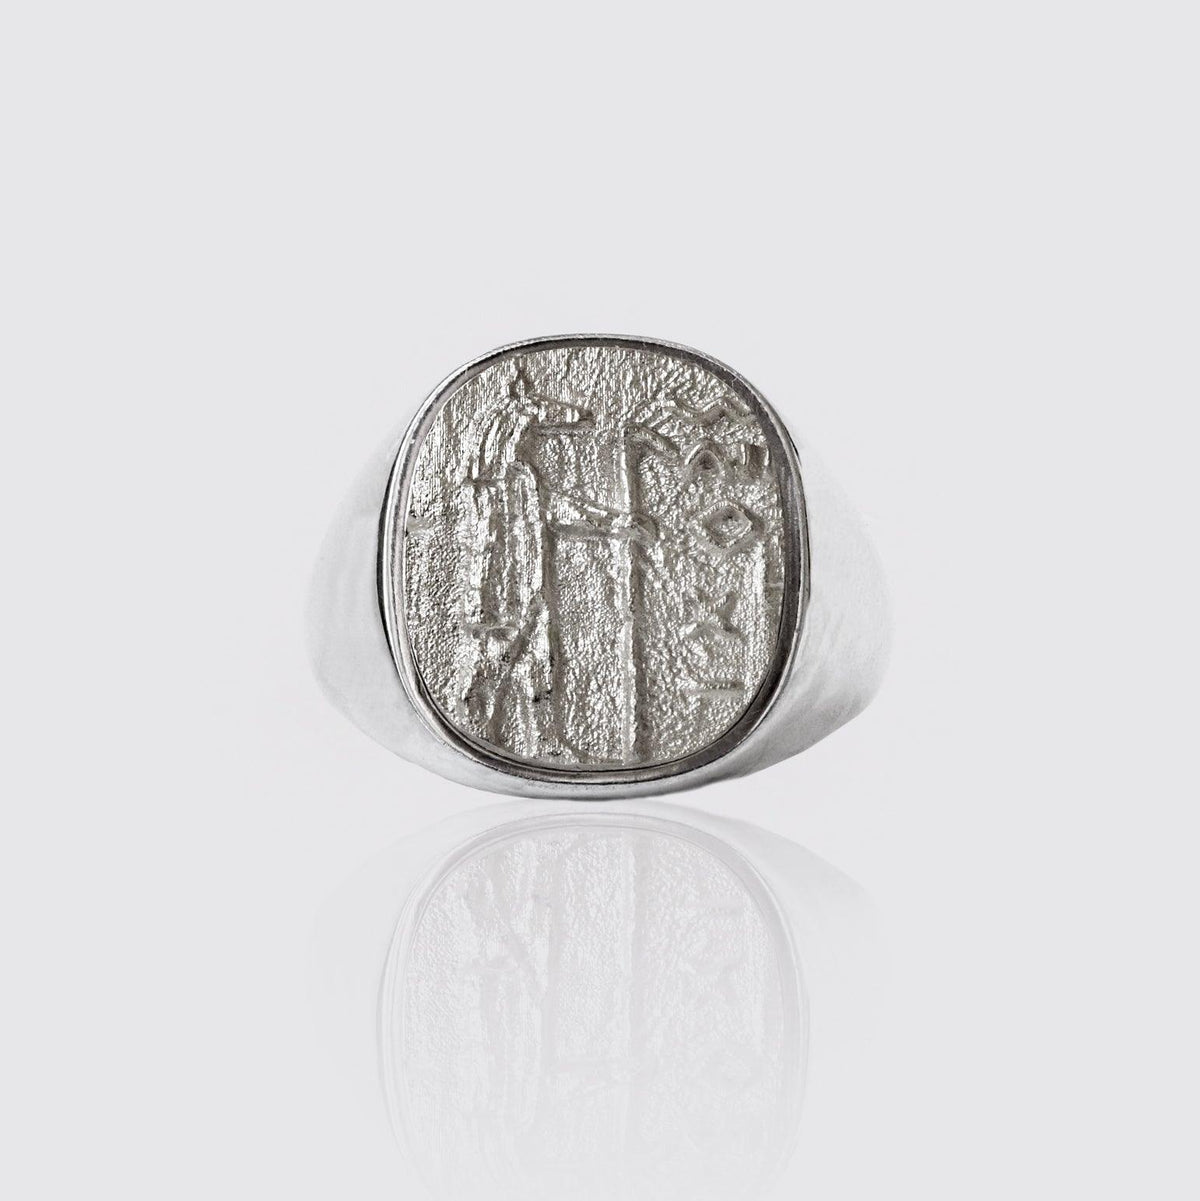 Mixed Metal Anubis Signet Ring in Sterling Silver and 14K Gold - Tippy Taste Jewelry